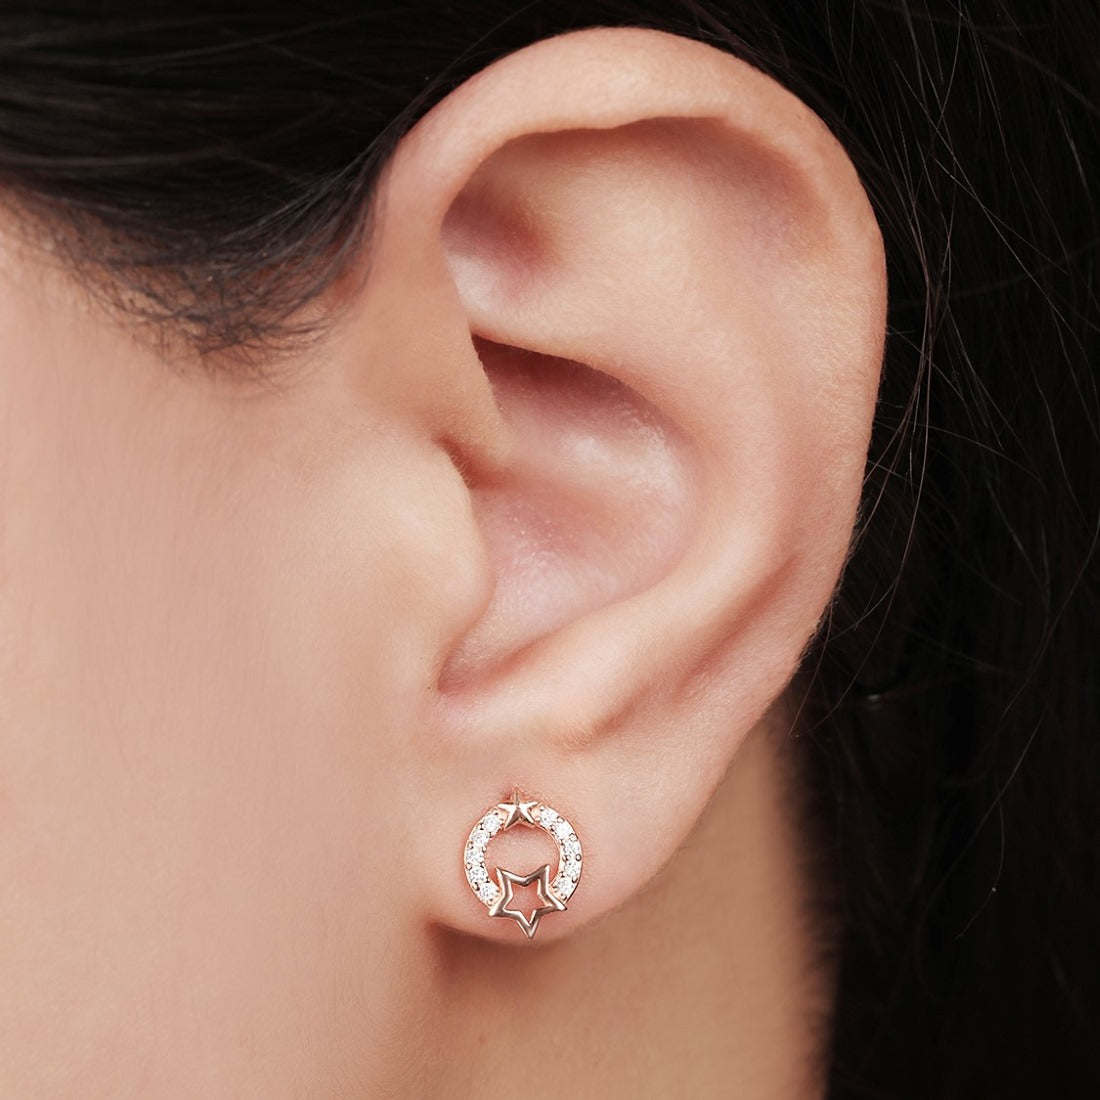 Celestial Harmony Rose Gold-Plated 925 Sterling Silver Earrings